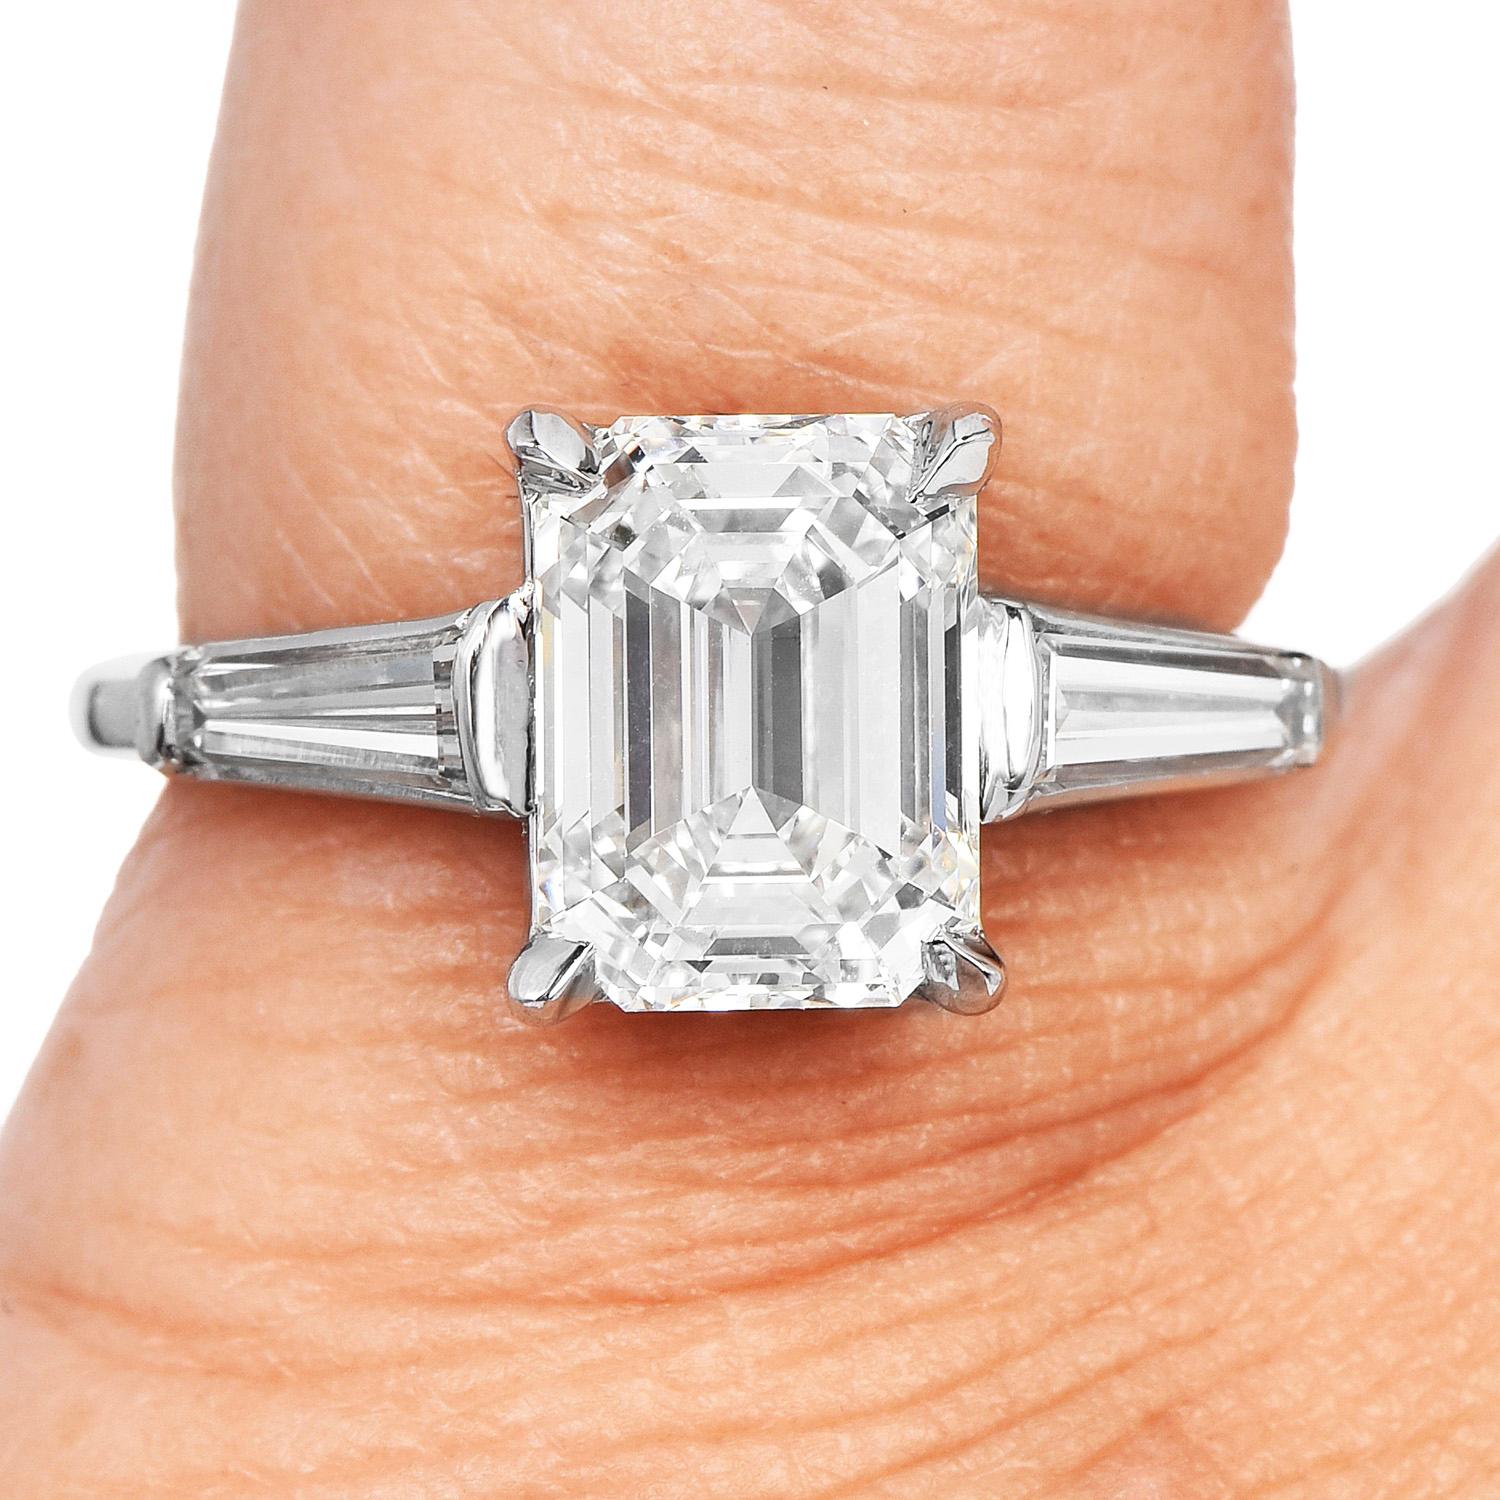 3.41cts GIA Emerald-Cut Diamond Baguette Platinum Engagement Ring In Excellent Condition For Sale In Miami, FL